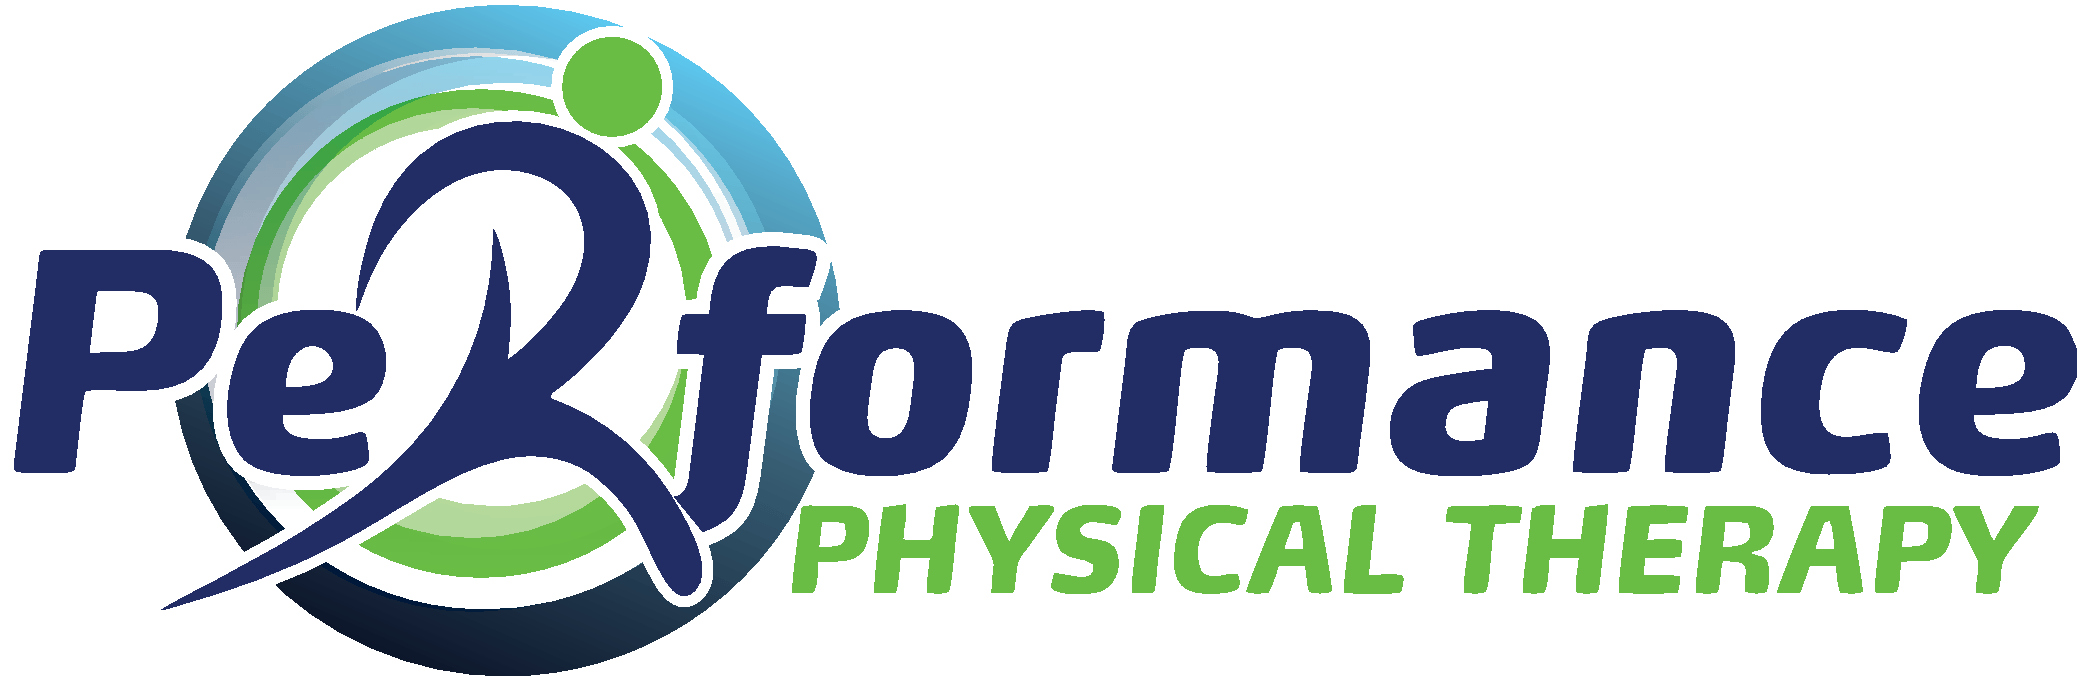 Physical Therapist Logo - Performance Physical Therapy - Performance Physical Therapy